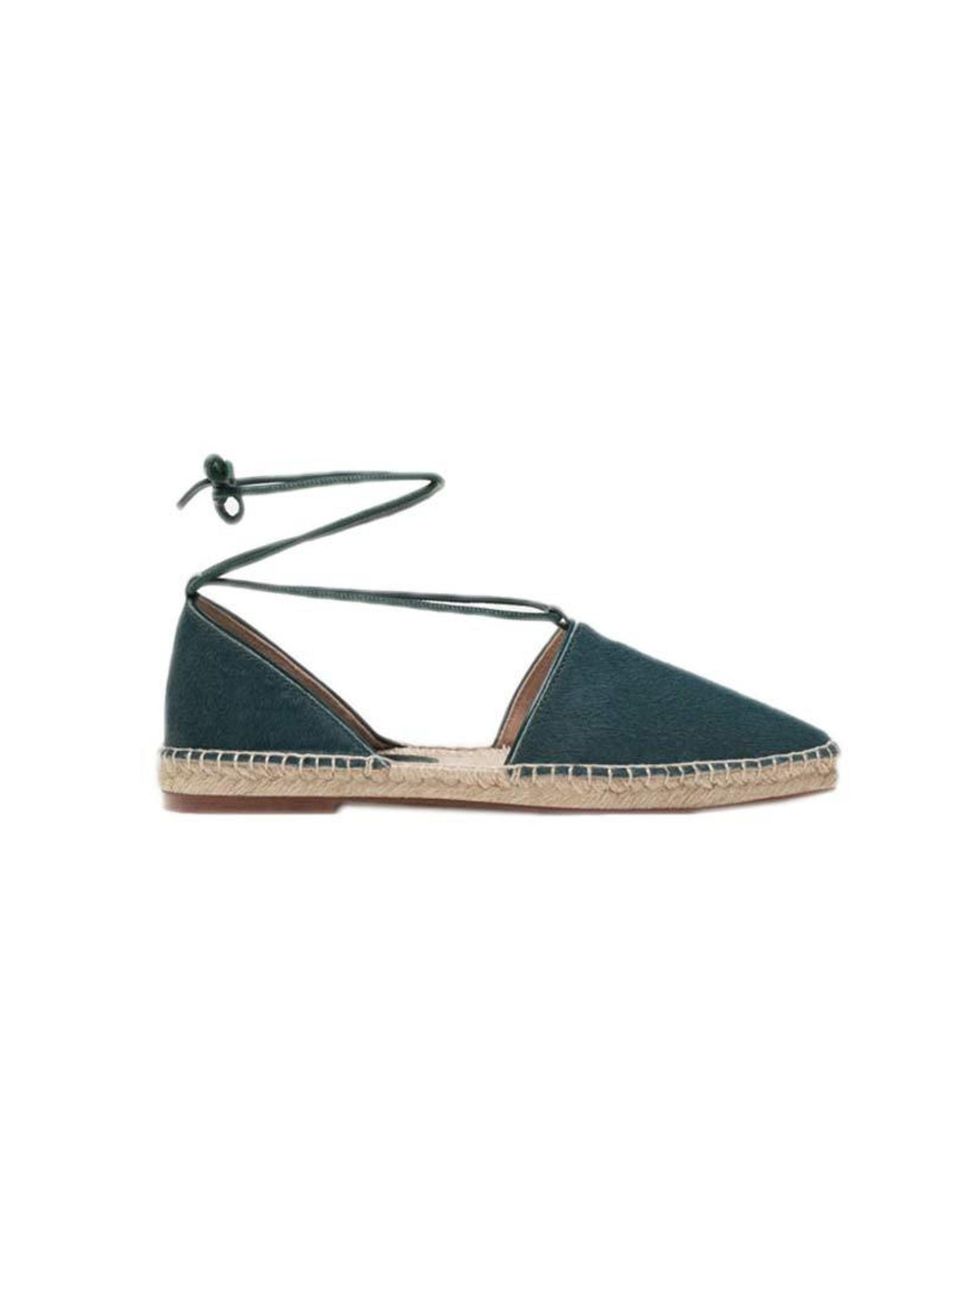 <p>A fuzzy little bank holiday treat.</p>

<p><a href="http://www.uterque.com/gb/en/footwear/see-all/calfhair-espadrilles-c96546p5616001.html?color=030" target="_blank">Uterqüe</a> espadrilles, £85</p>